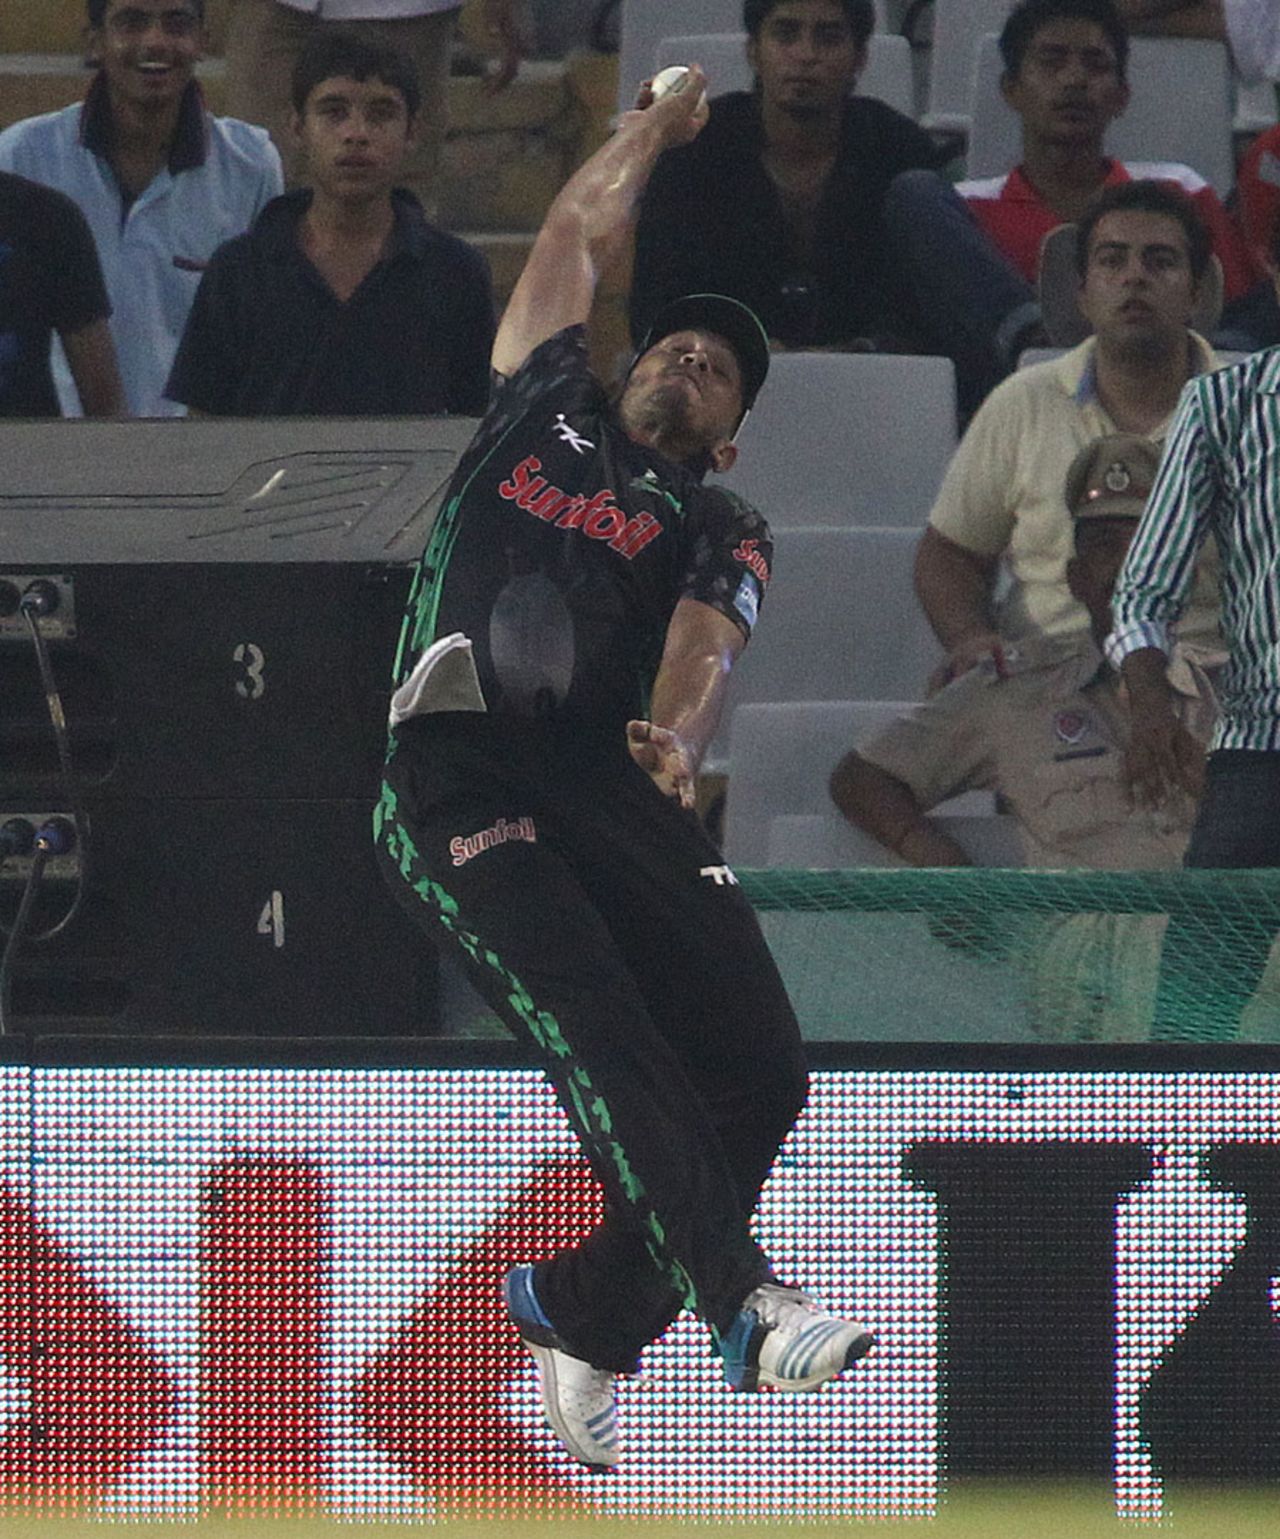 Vaughn van Jaarsveld leaps to try take a catch at the boundary, Dolphins v Perth Scorchers, Champions League T20, Mohali, September 20, 2014